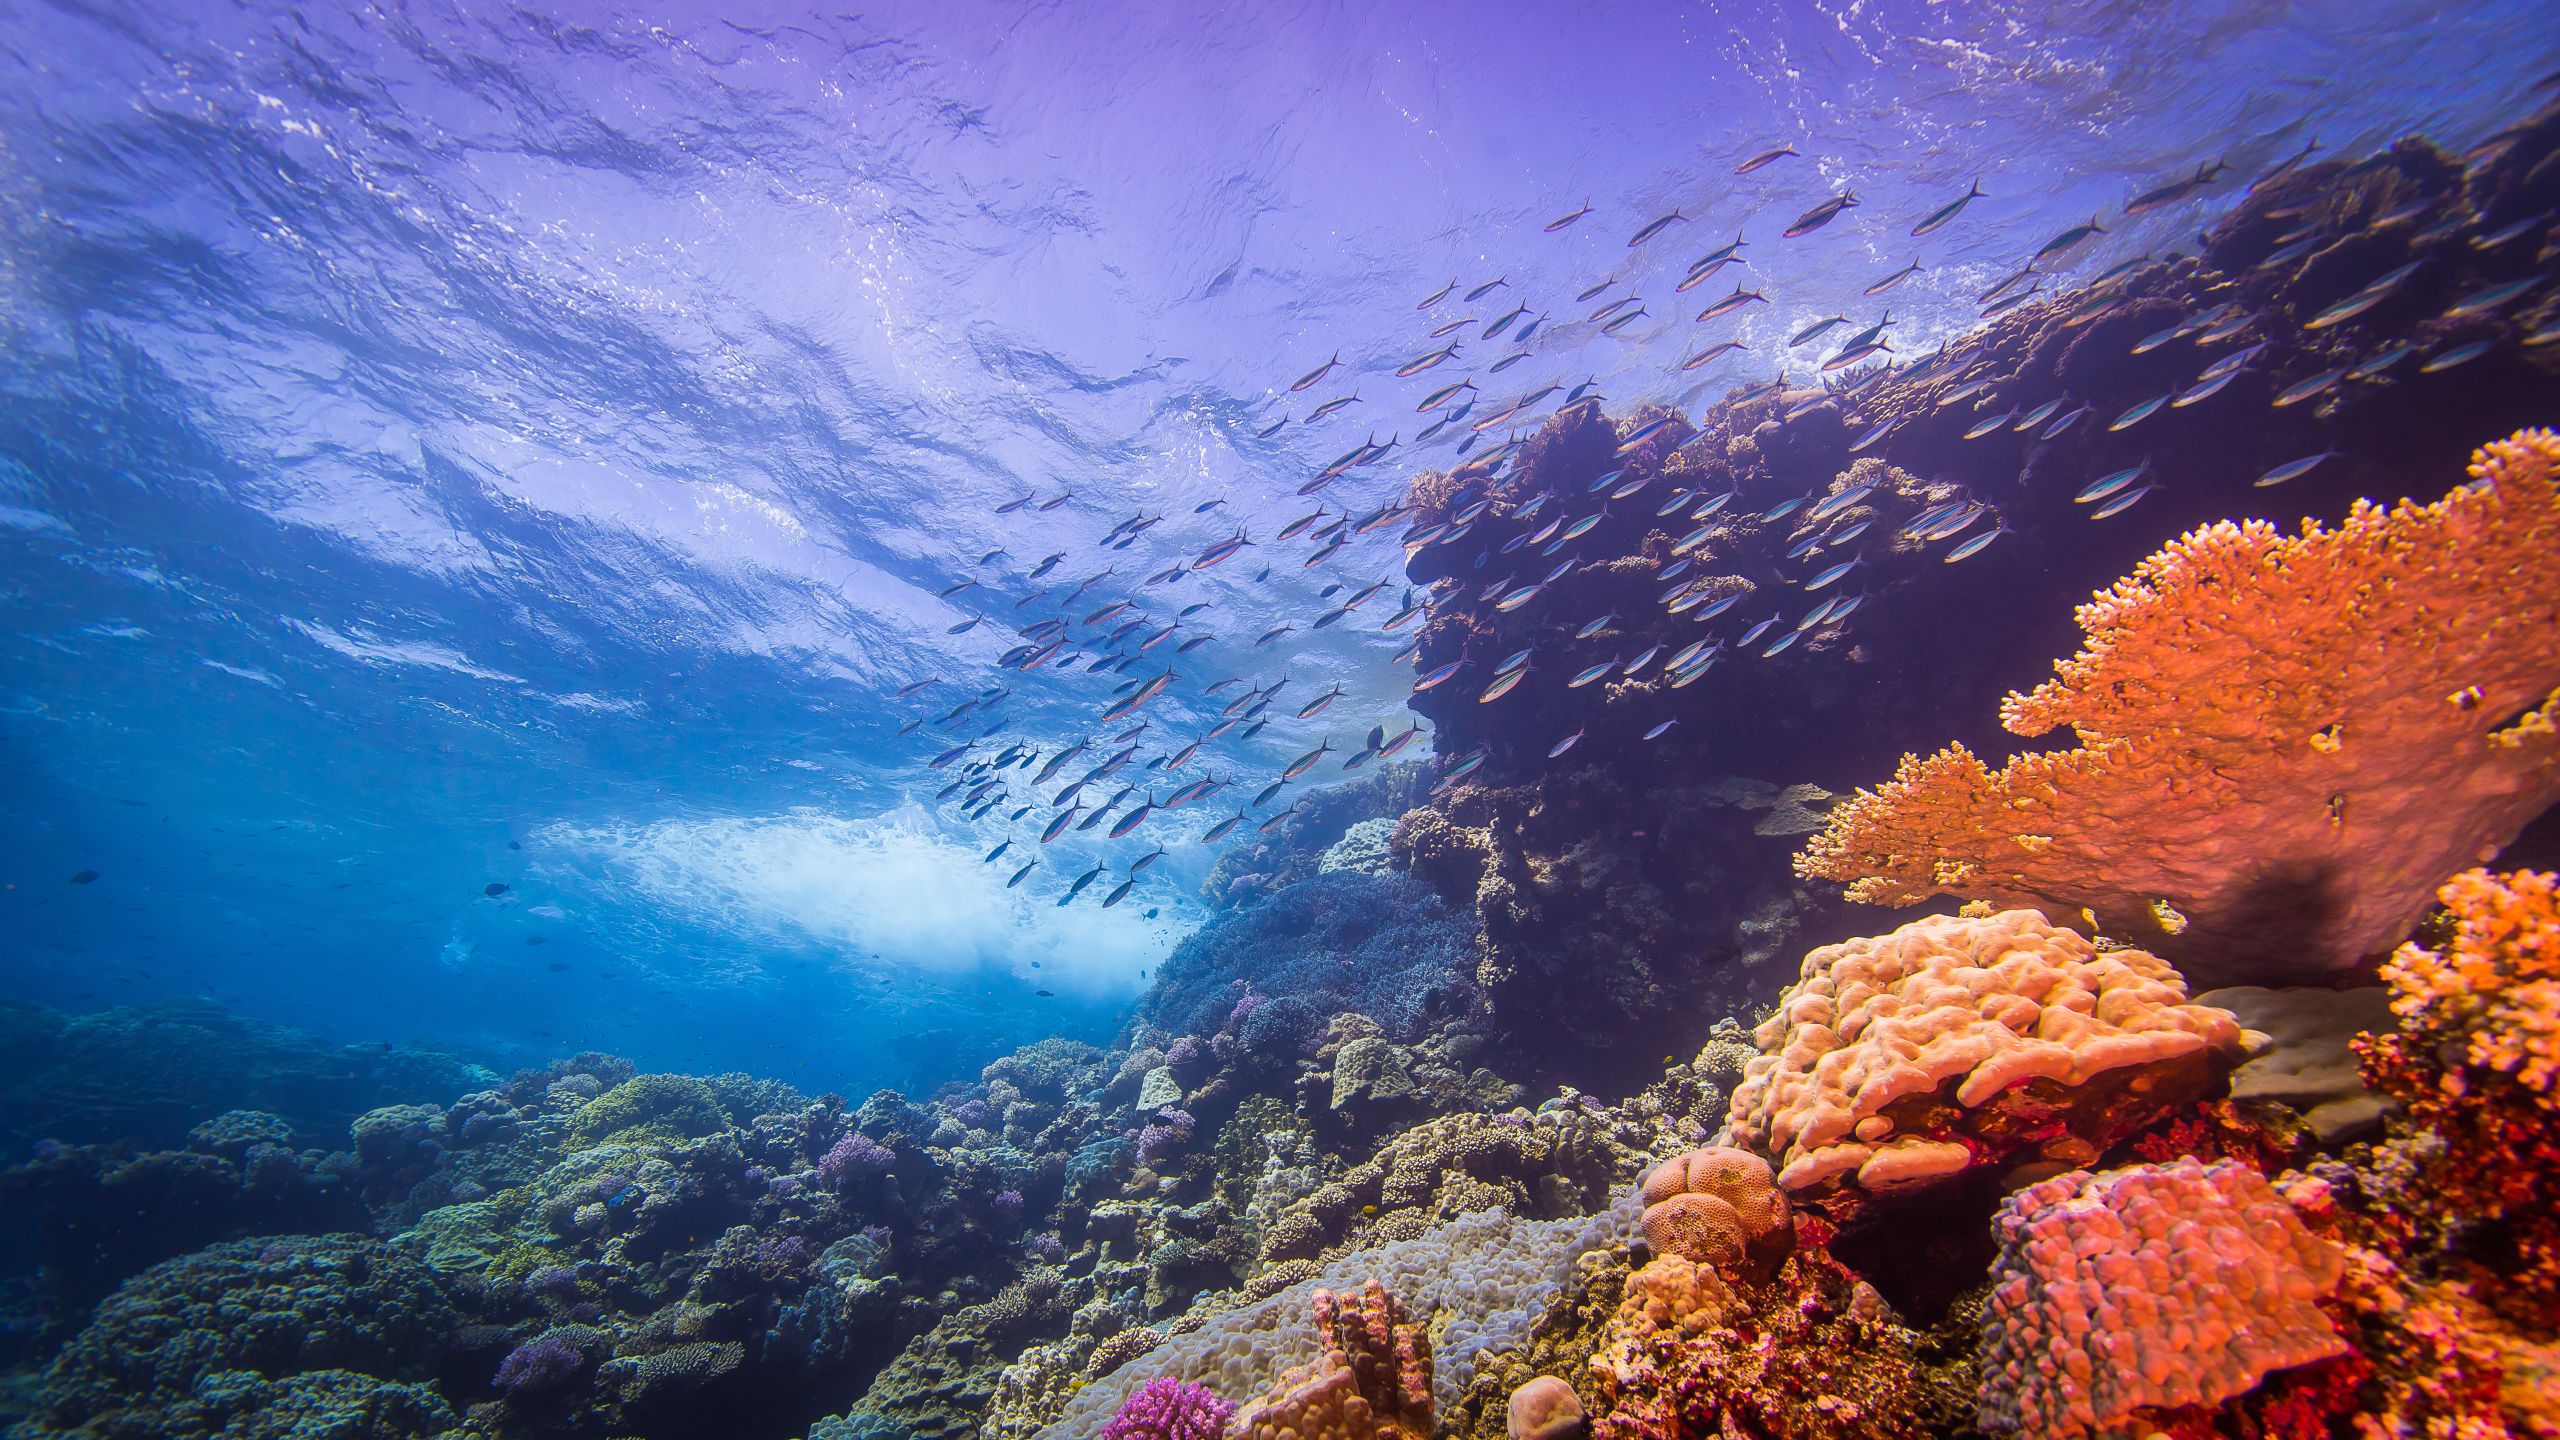 Underwater photograph of an aquatic ecosystem, with multicoloured coral, hundreds of fish and the blue of the ocean in the background.